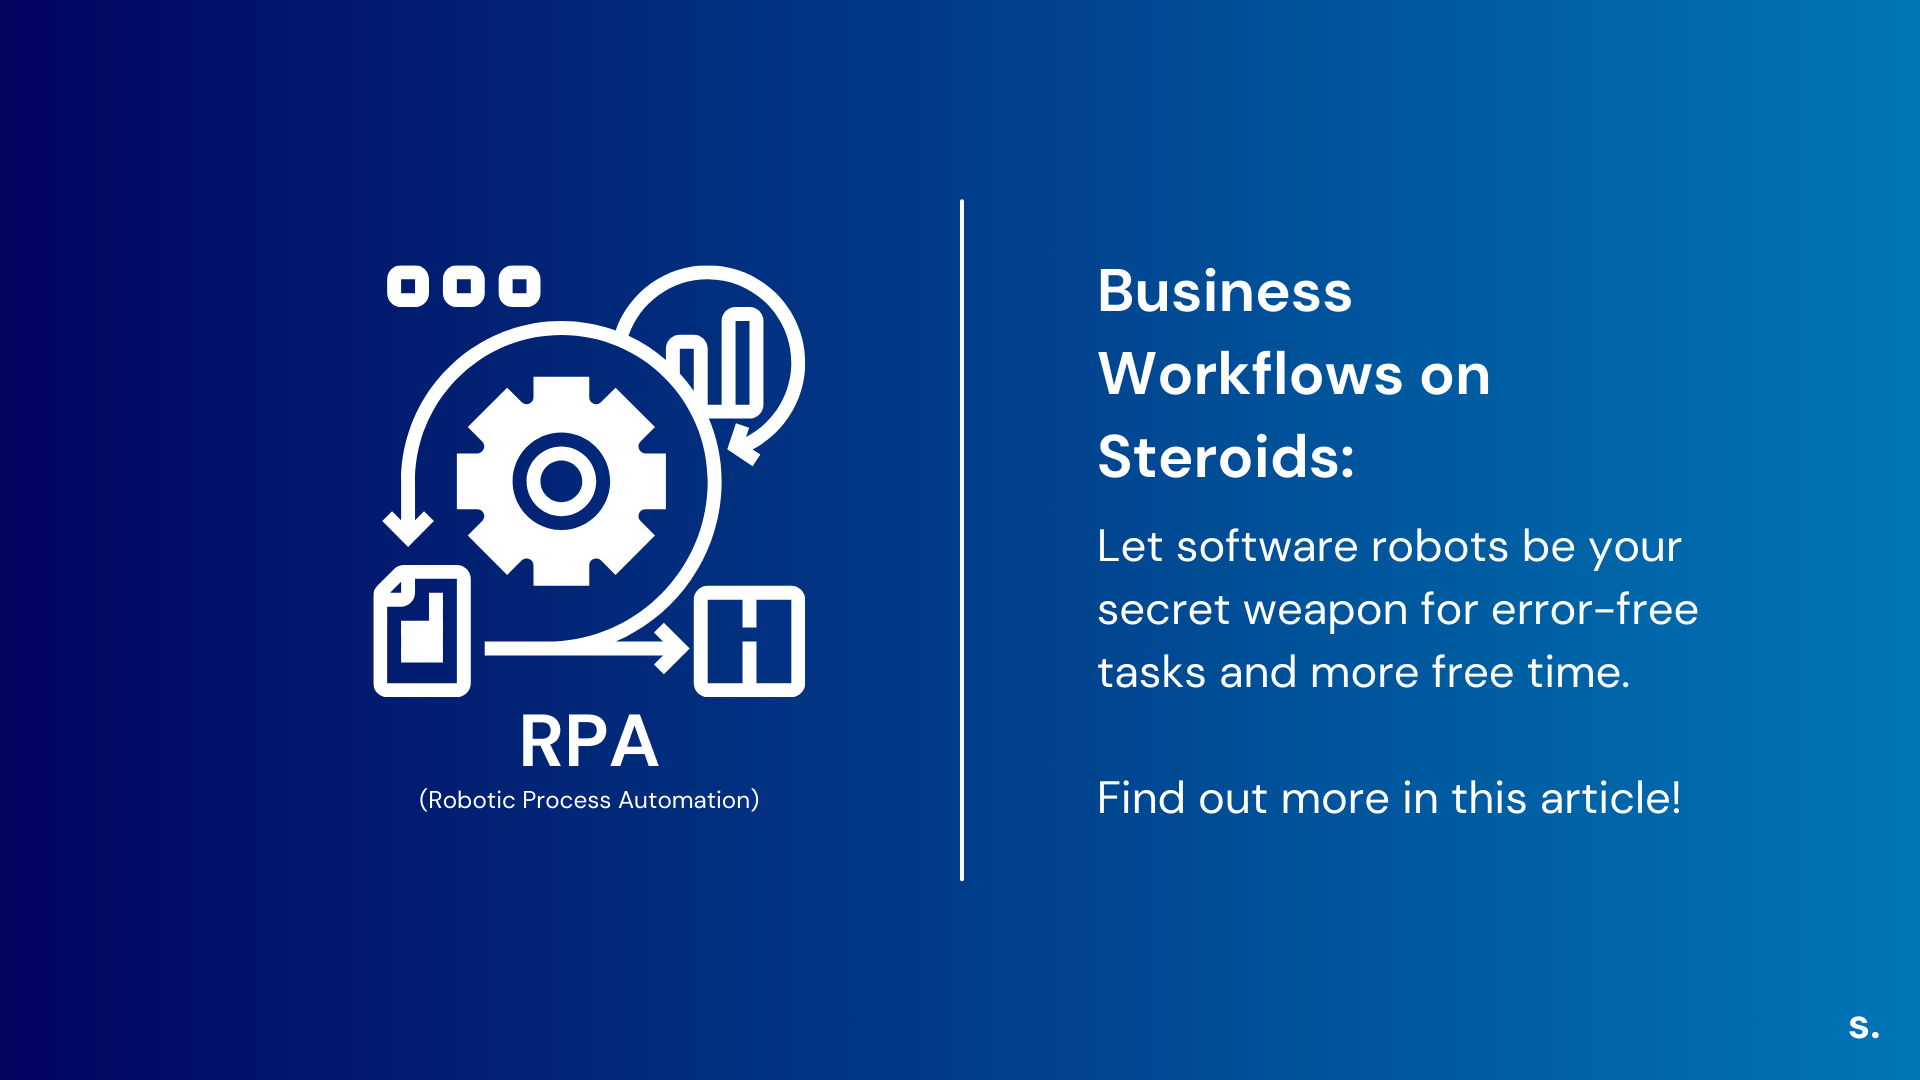 Business Workflows On Steroids: What is Robotic Process Automation (RPA)?